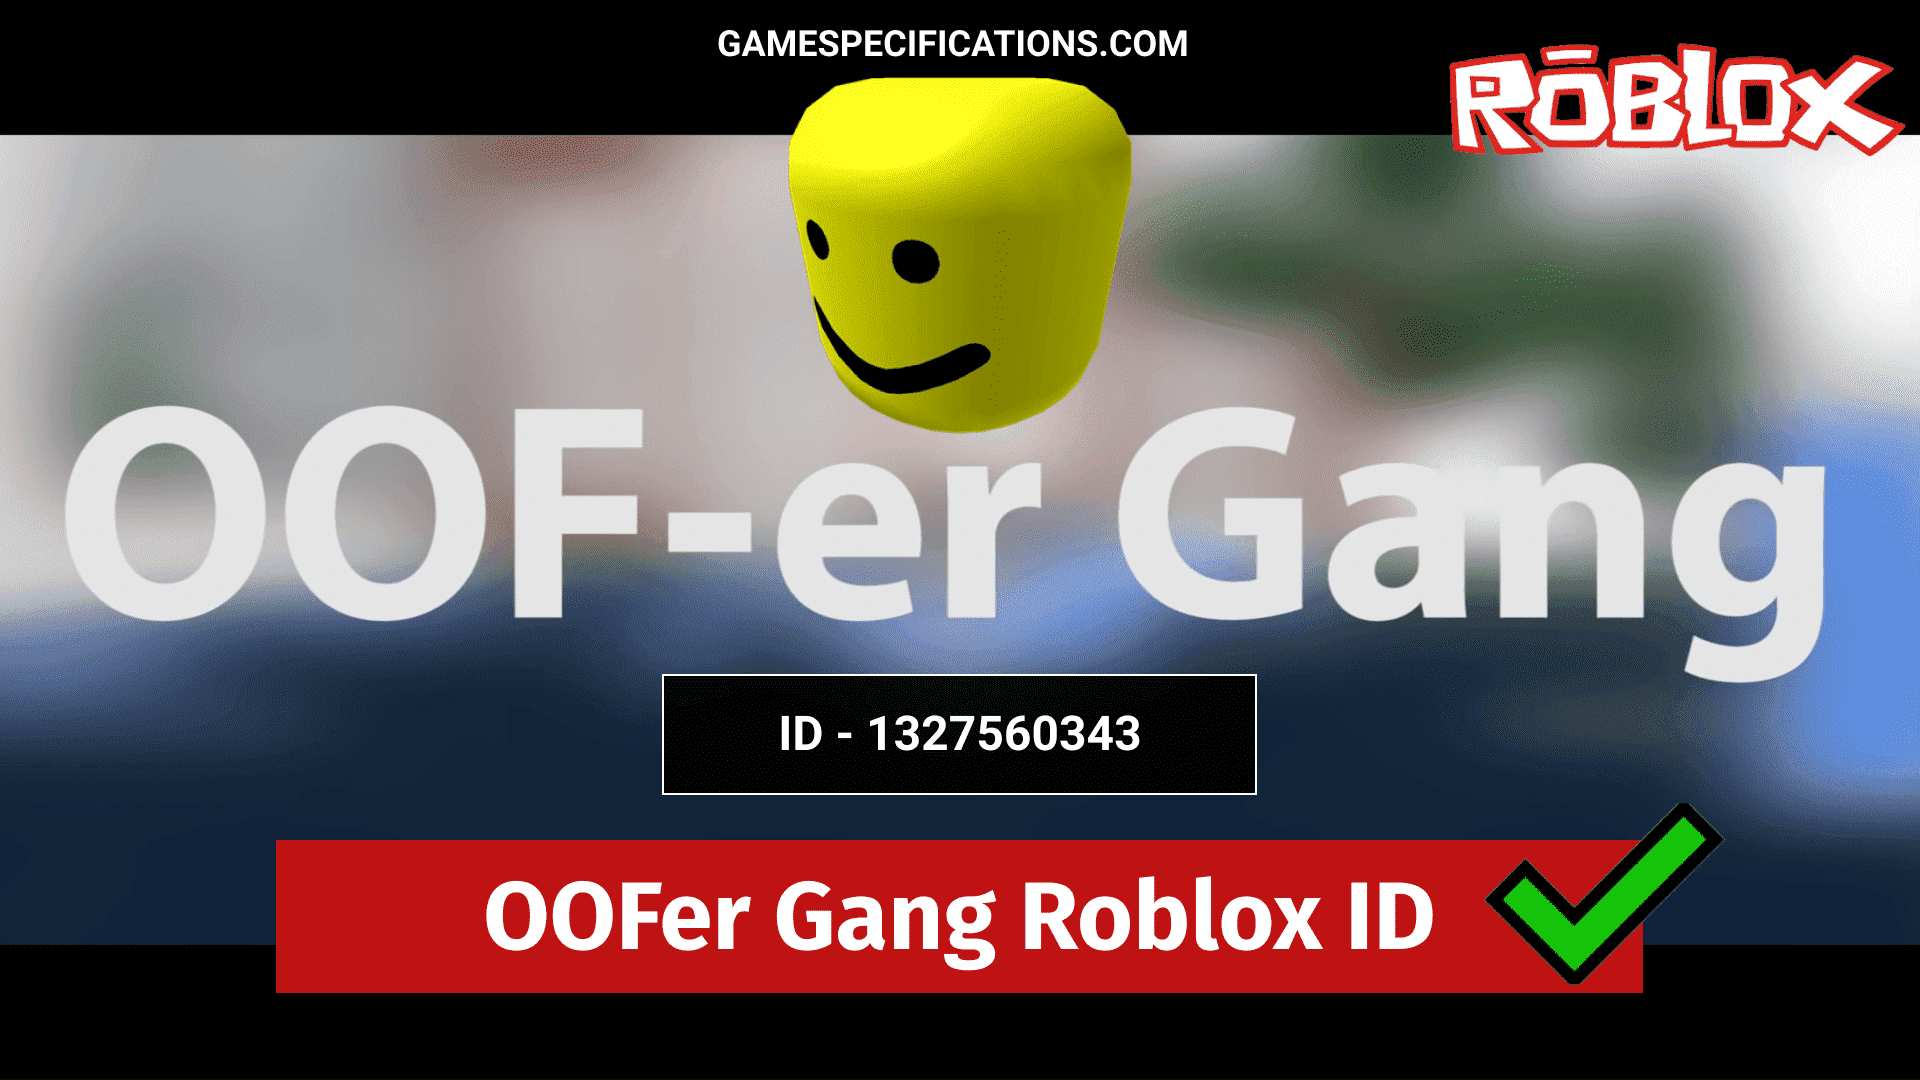 Oofer Gang Roblox Id Codes 2021 Game Specifications - roblox death sound league of legends